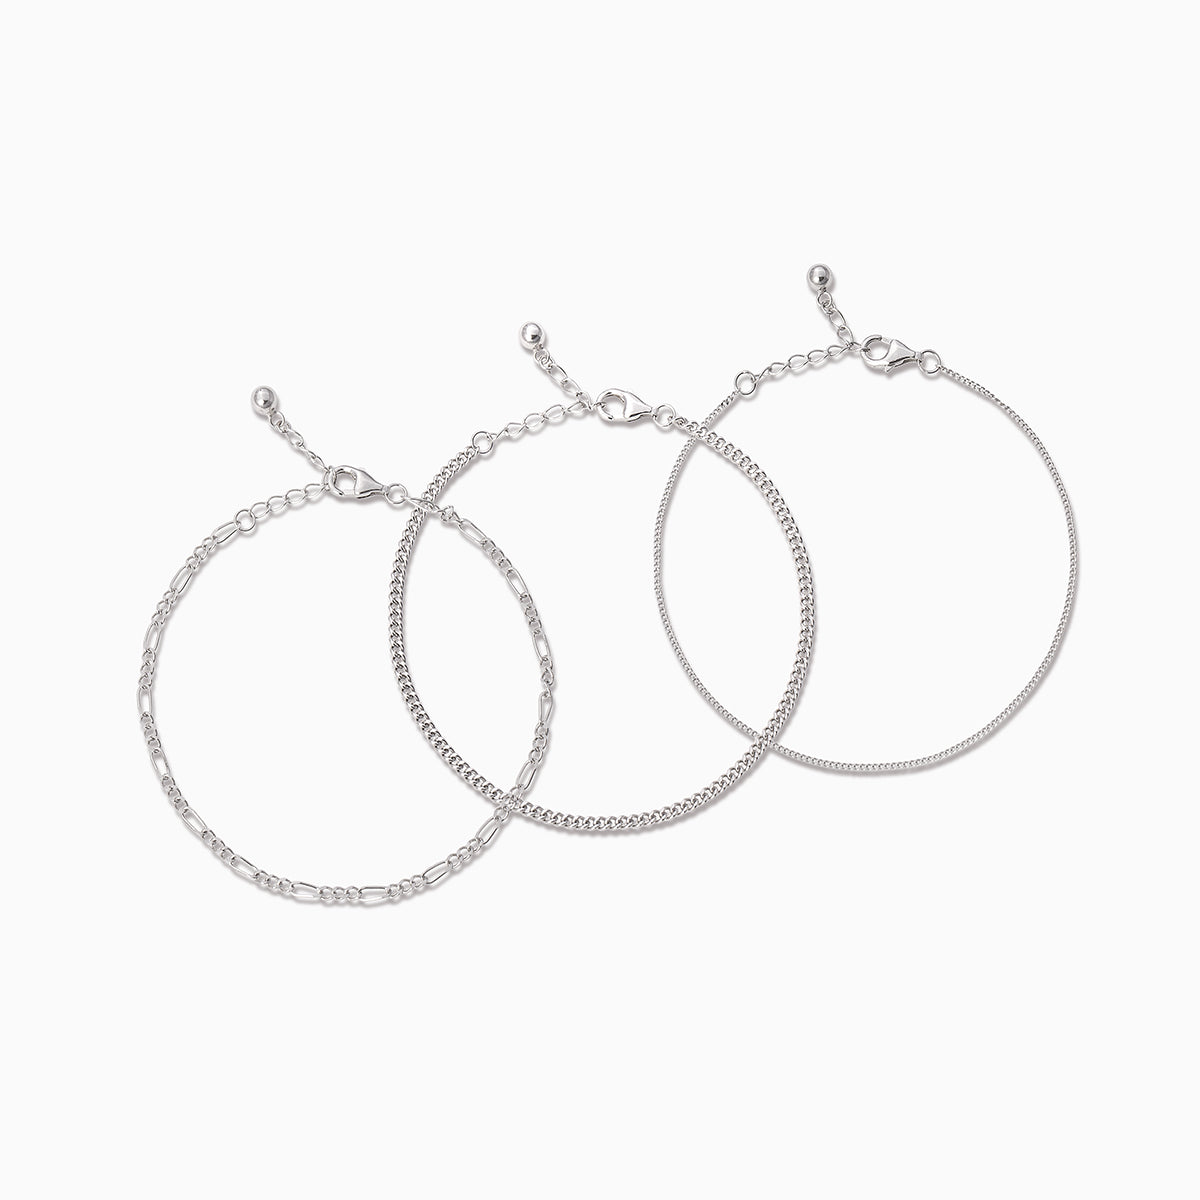 18″ D-RING EXTENDER WITH SOFT LOOP CHOKER ON ONE END